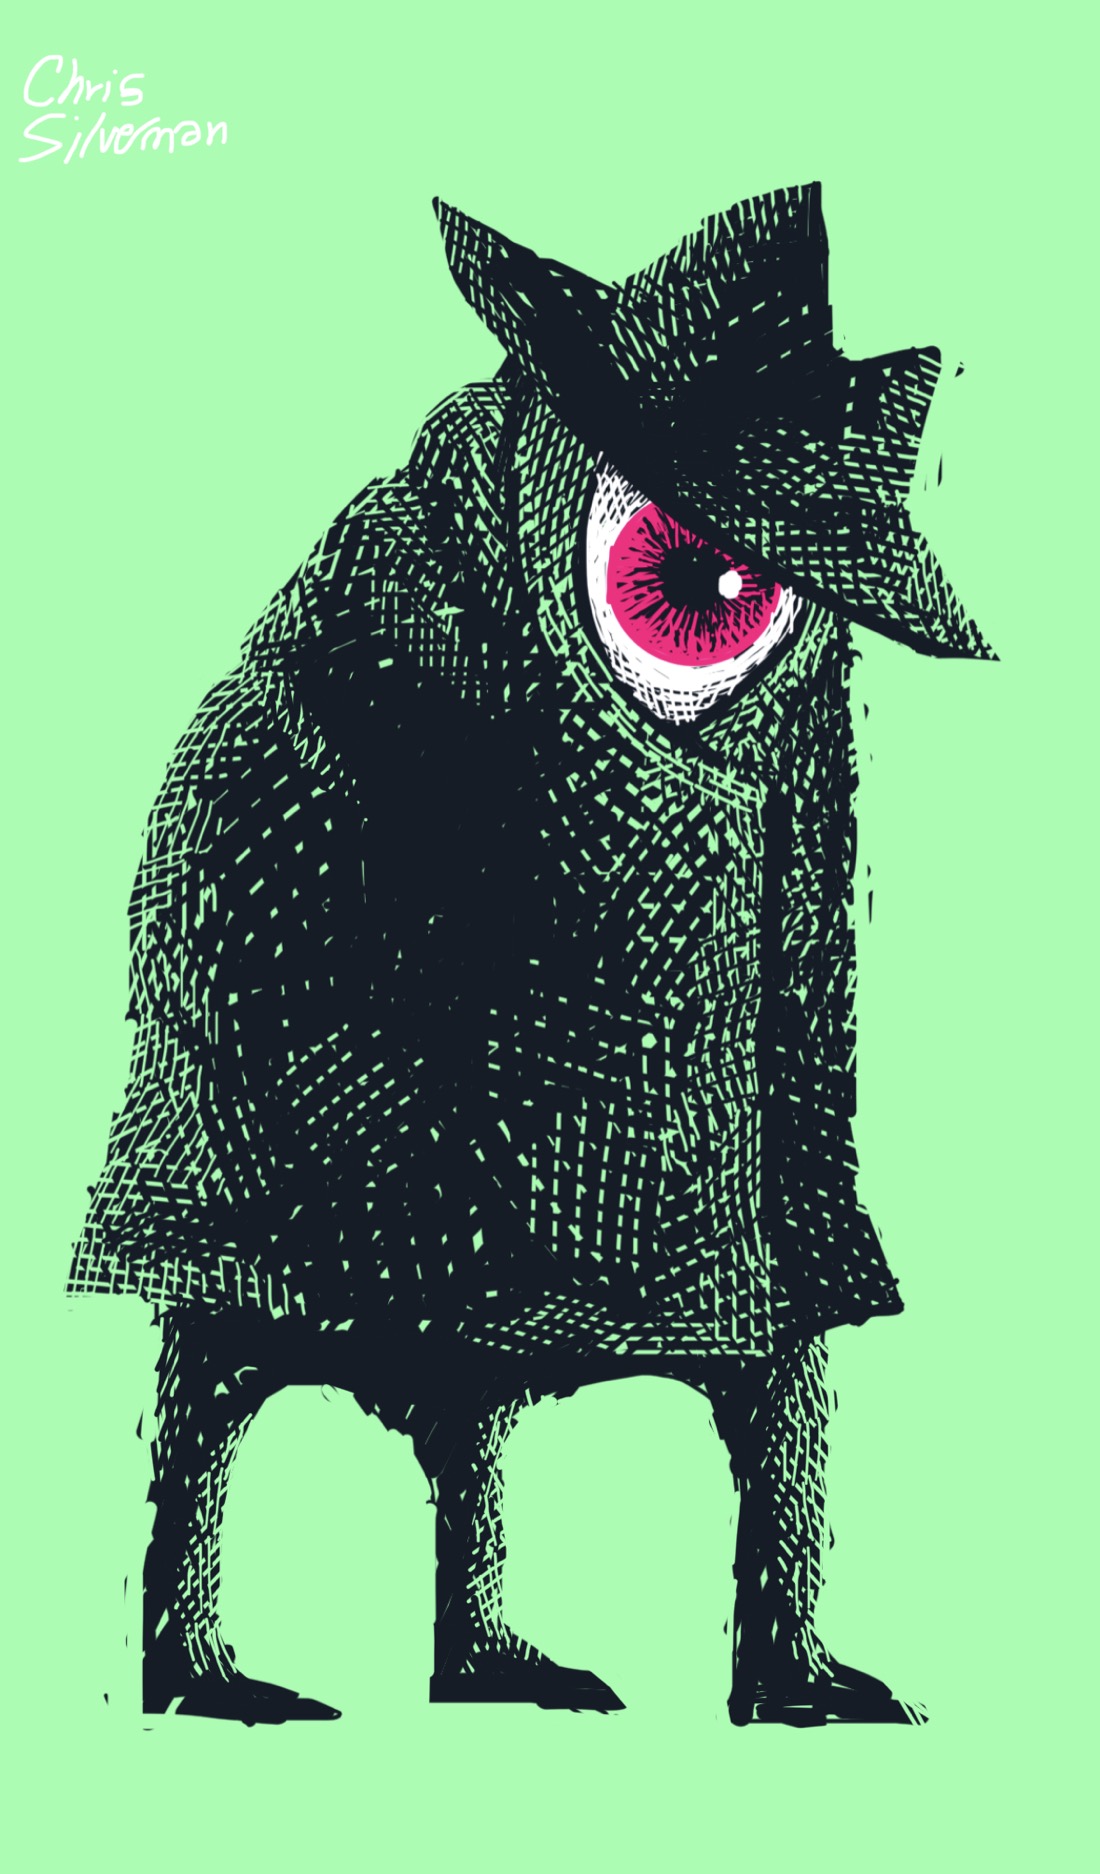 A figure with three legs and no arms. The figure is wearing a trenchcoat and a large-brimmed spy hat, with one giant crimson eye appearing under the hat. The coat is buttoned up tightly around a large eyeball that, while most of it is concealed, appears to be the entirety of the creature's head.